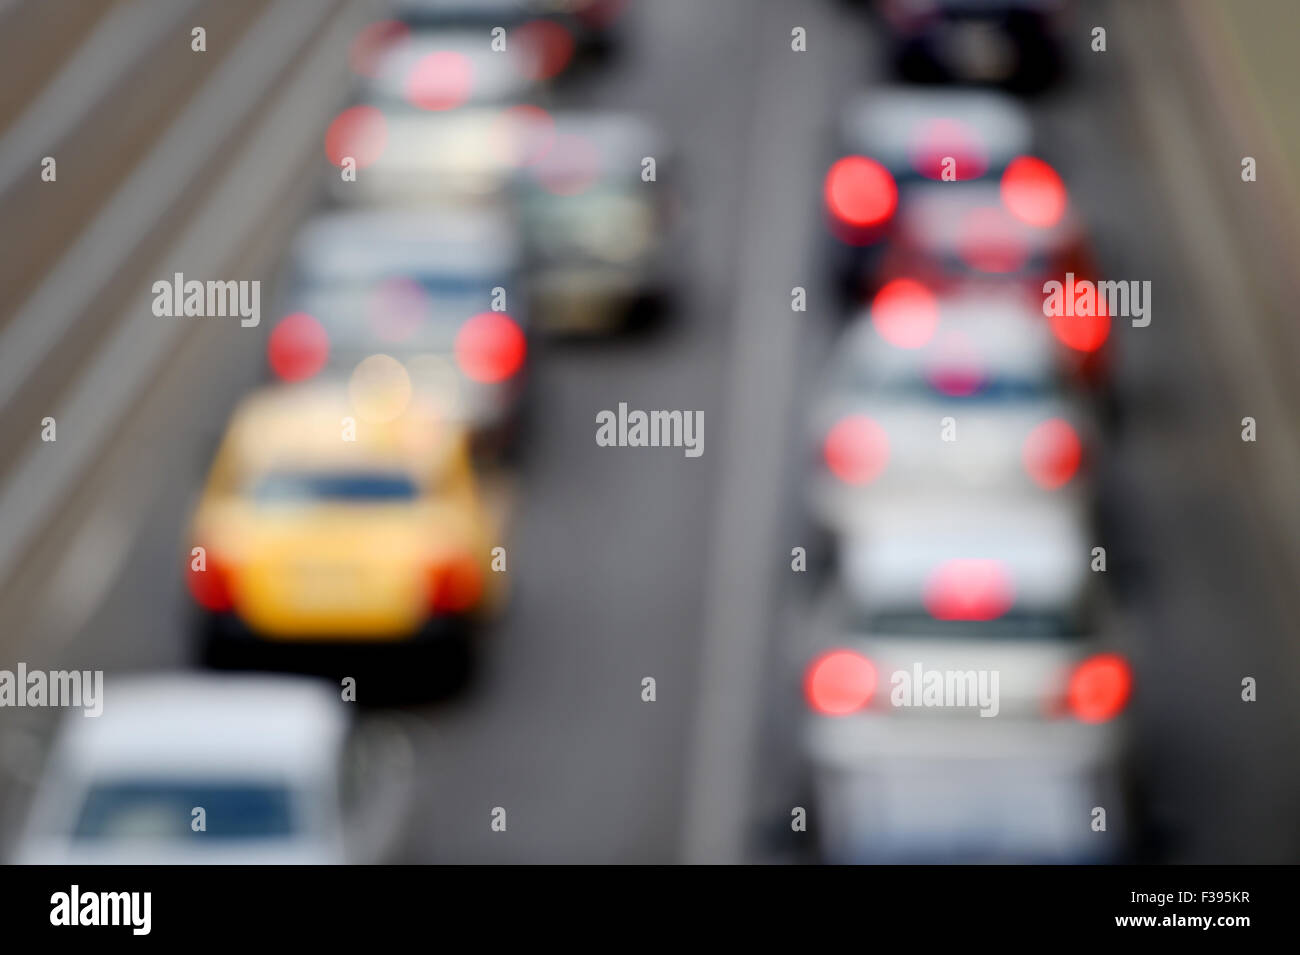 Blur shot of urban rush hour scene with multiple cars in a traffic congestion Stock Photo